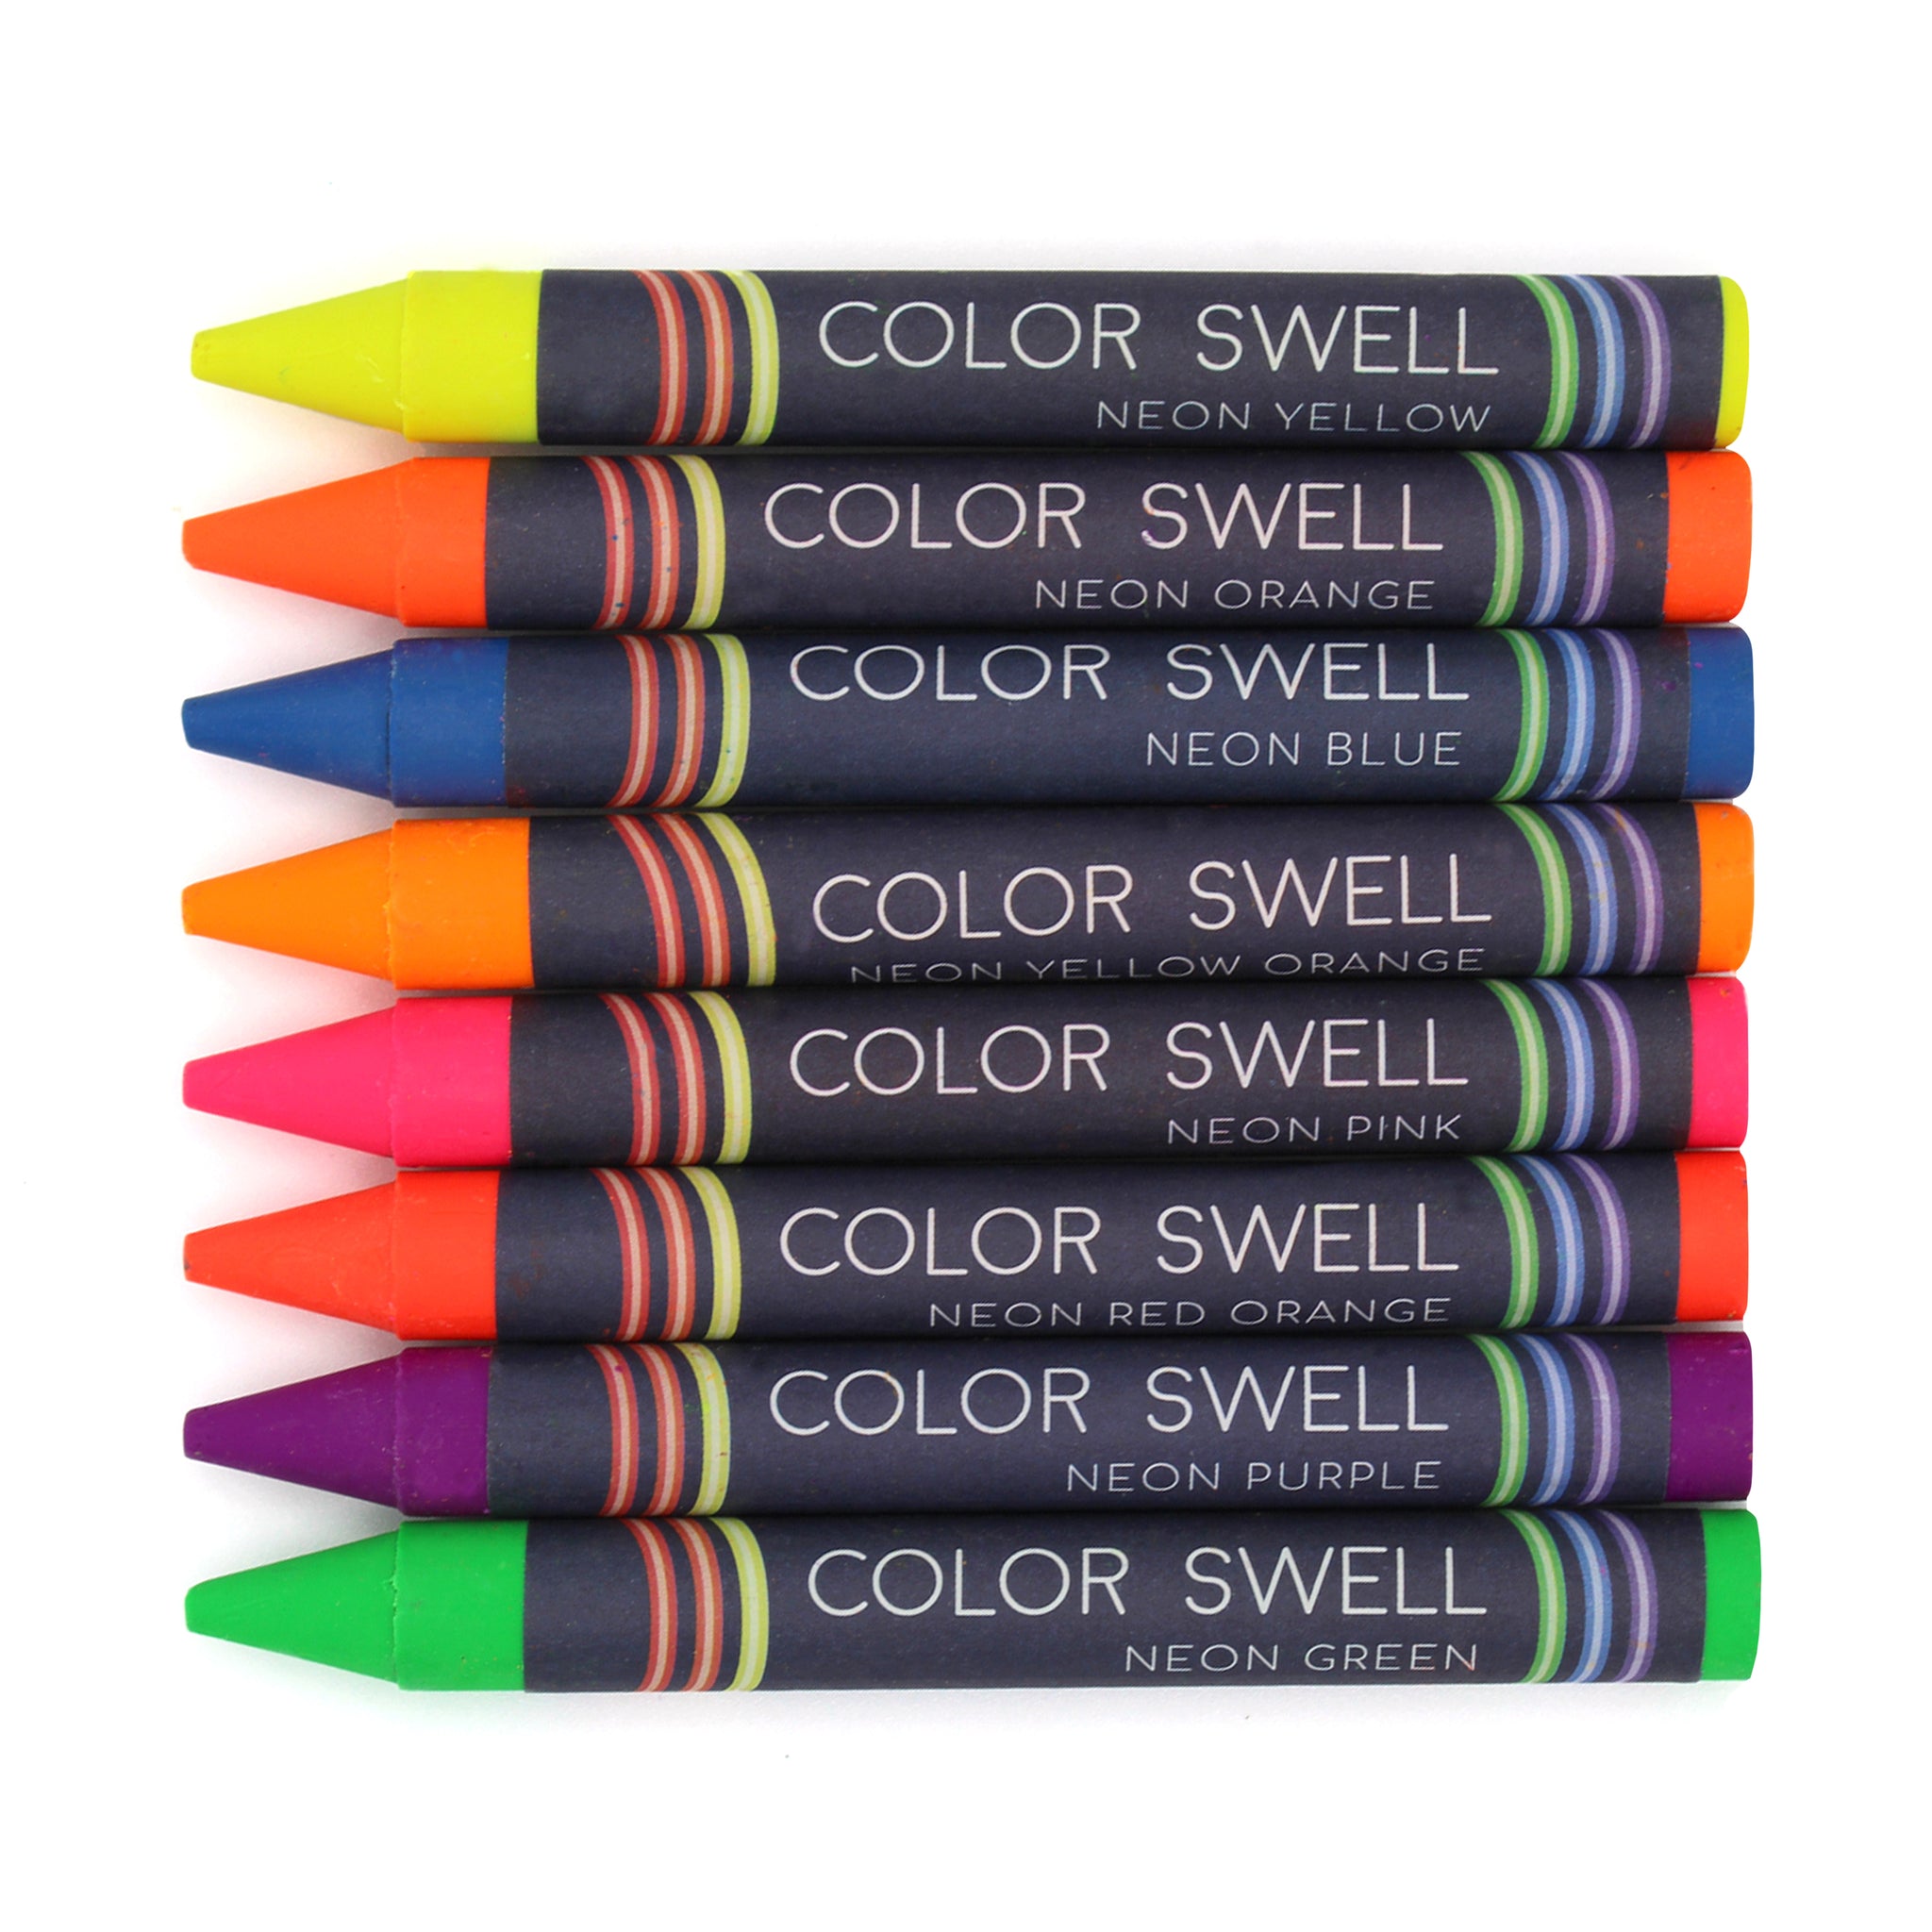 Color Swell Neon Crayons Bulk Packs - 18 Boxes of Fun Neon Bulk Crayons  (144 total) of Teacher Quality Durable Classroom Packs for Kids Students  Party